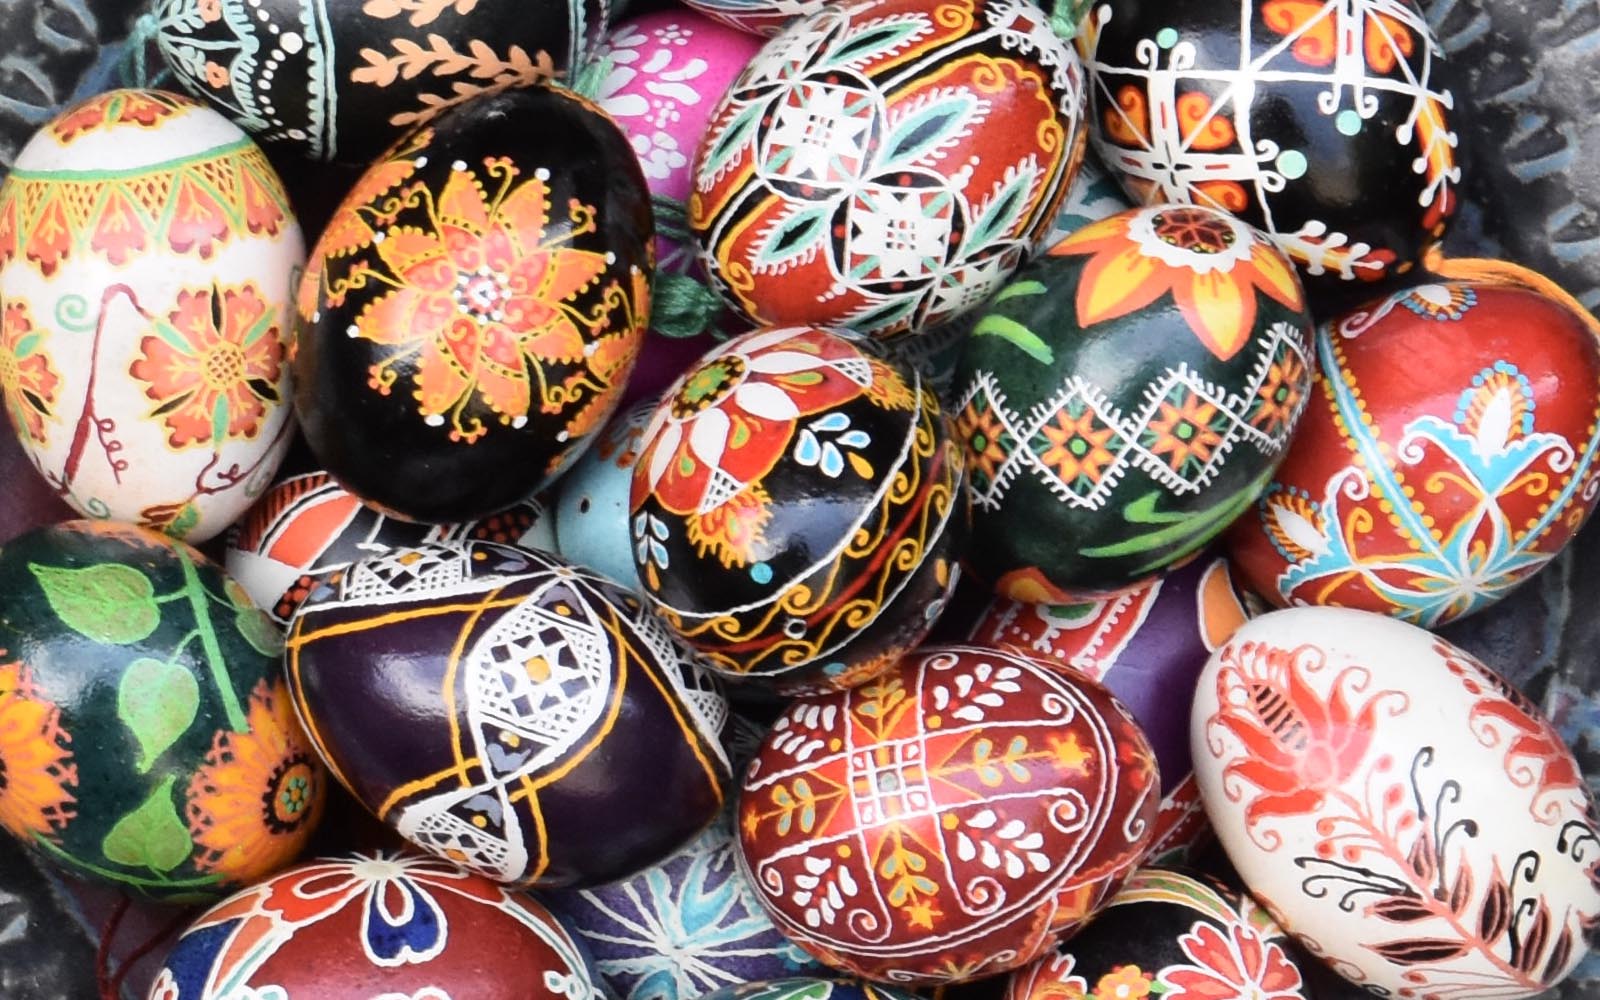 A bowl full of decorated pysanky eggs.